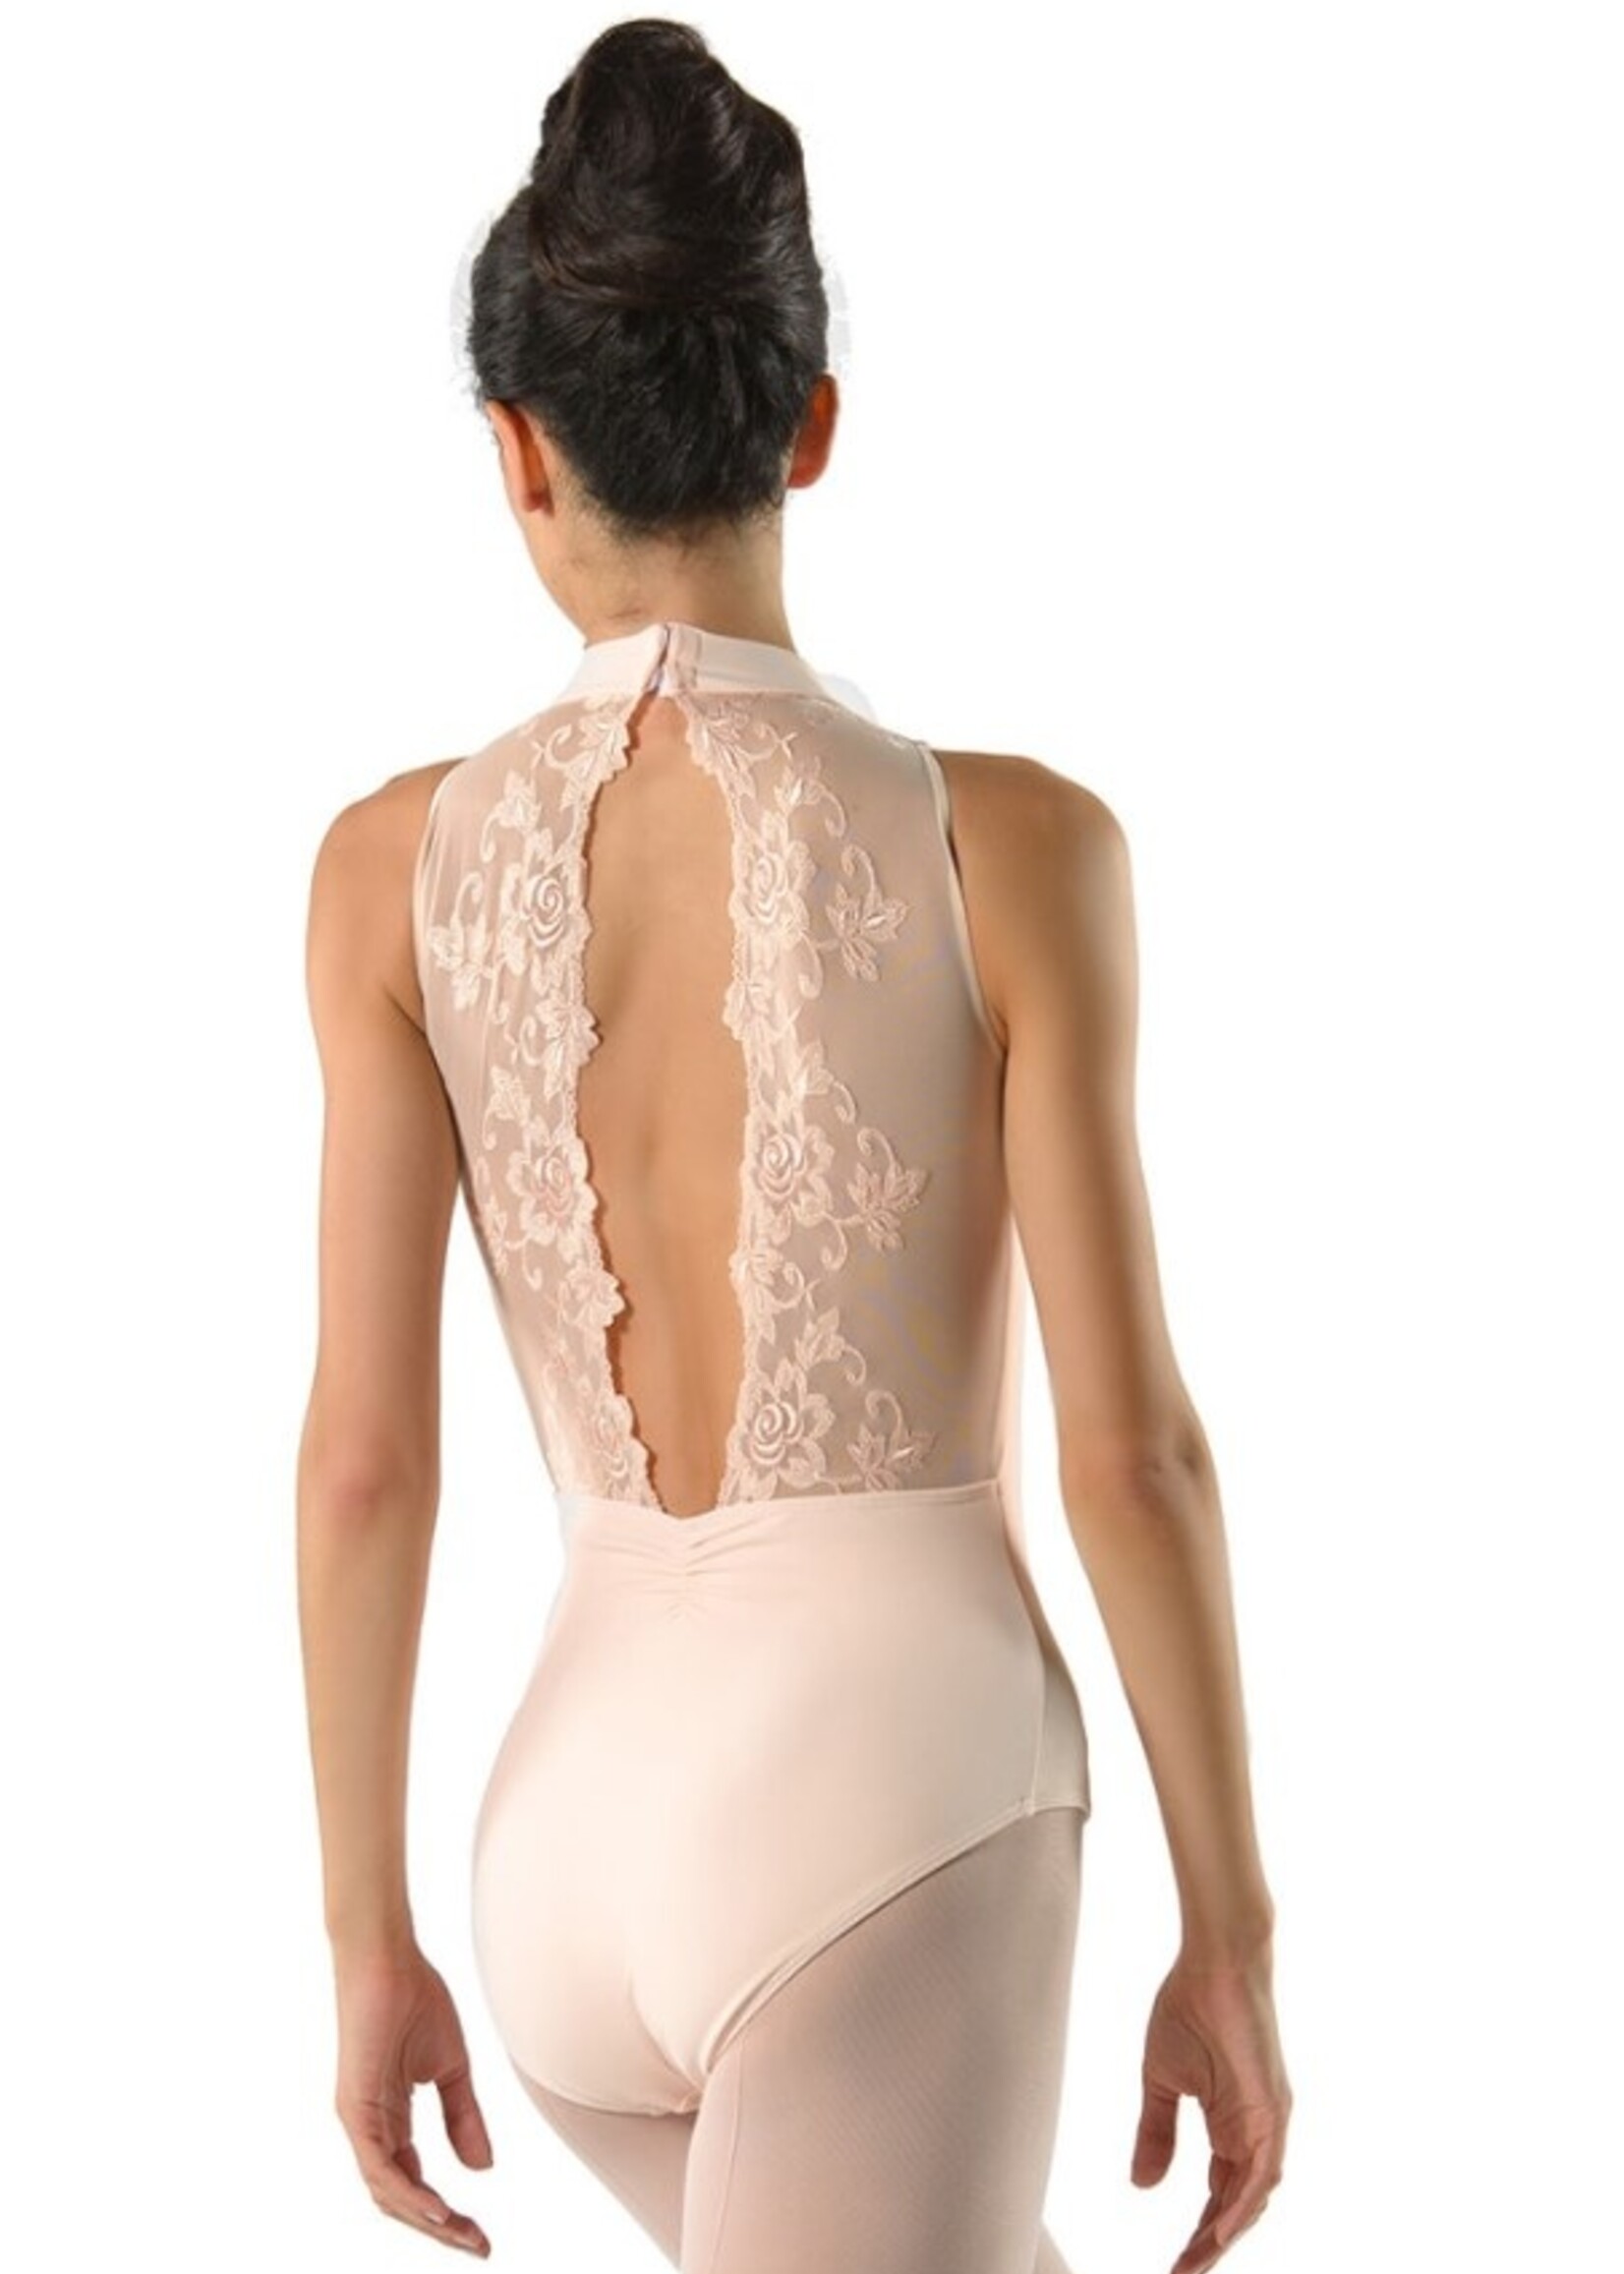 Ballet Rosa Amelie High Neck Leotard with Scallop Lace Open Back